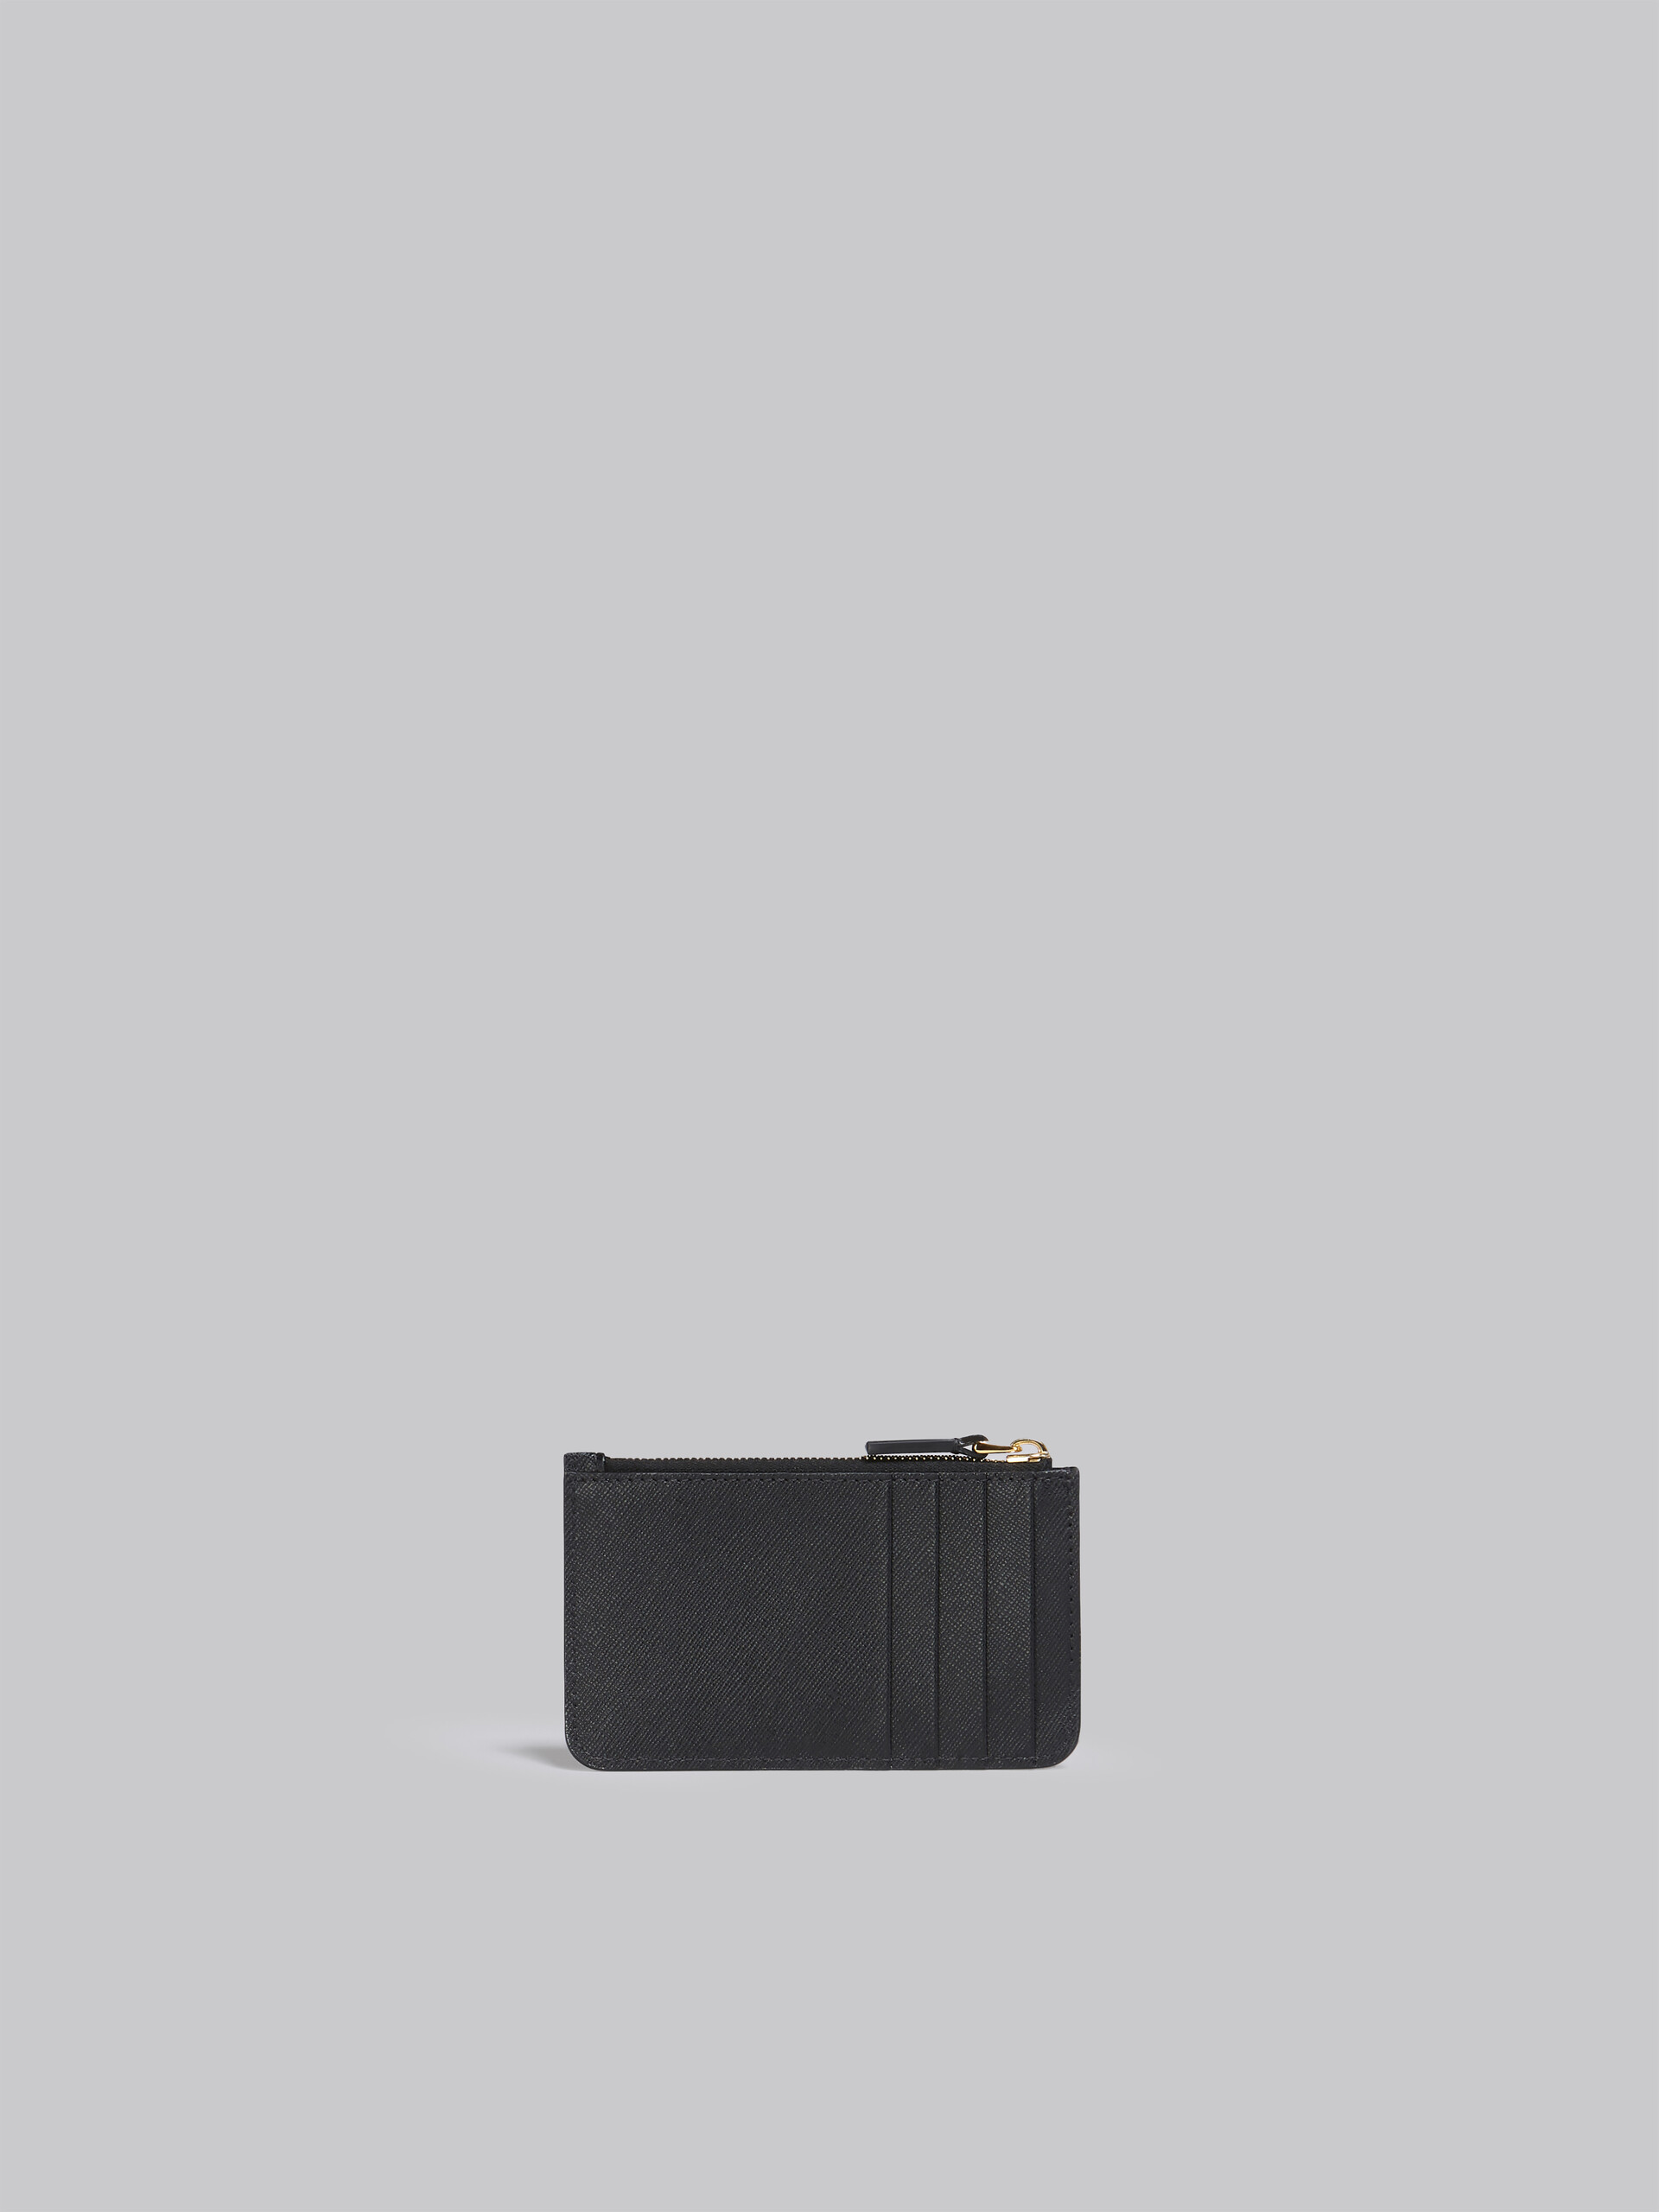 Black saffiano leather card case - Wallets - Image 3